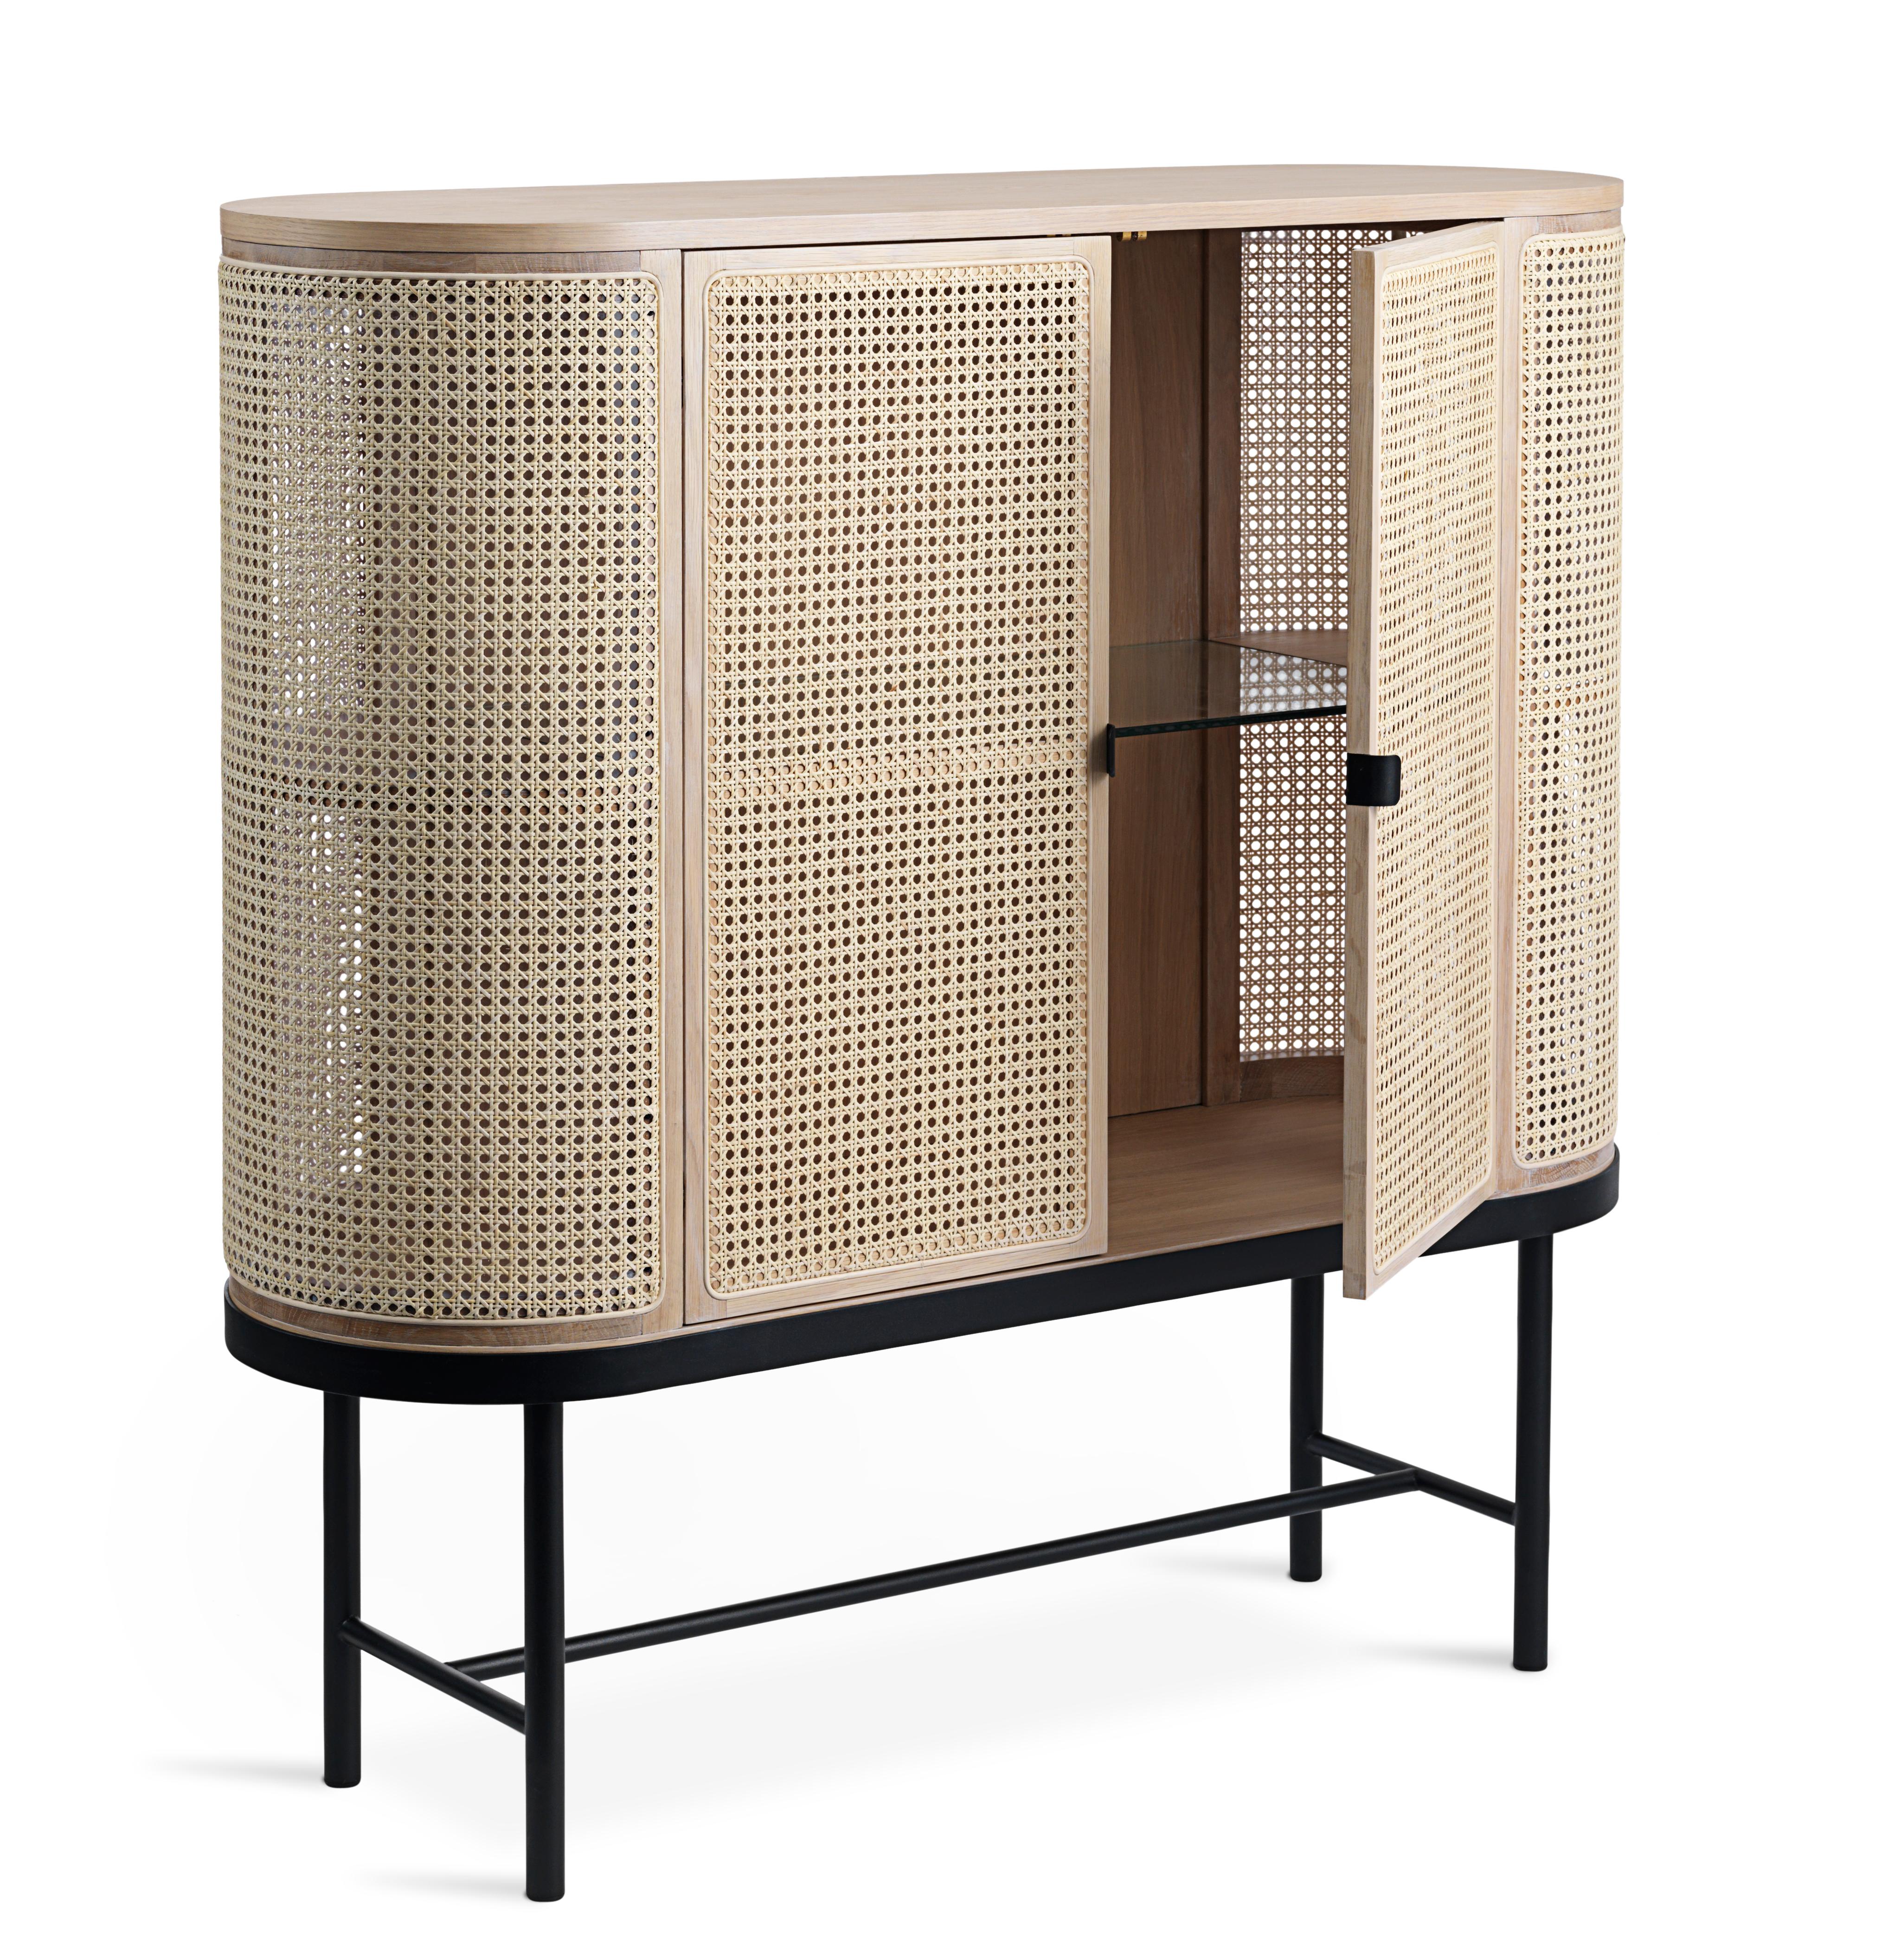 An elegant, spacious wood and wicker cabinet with a simple metal frame. The cabinet’s unique design and choice of classic materials light up the home, its combination of French rattan and oak exuding a lovely sense of warmth. The classic references